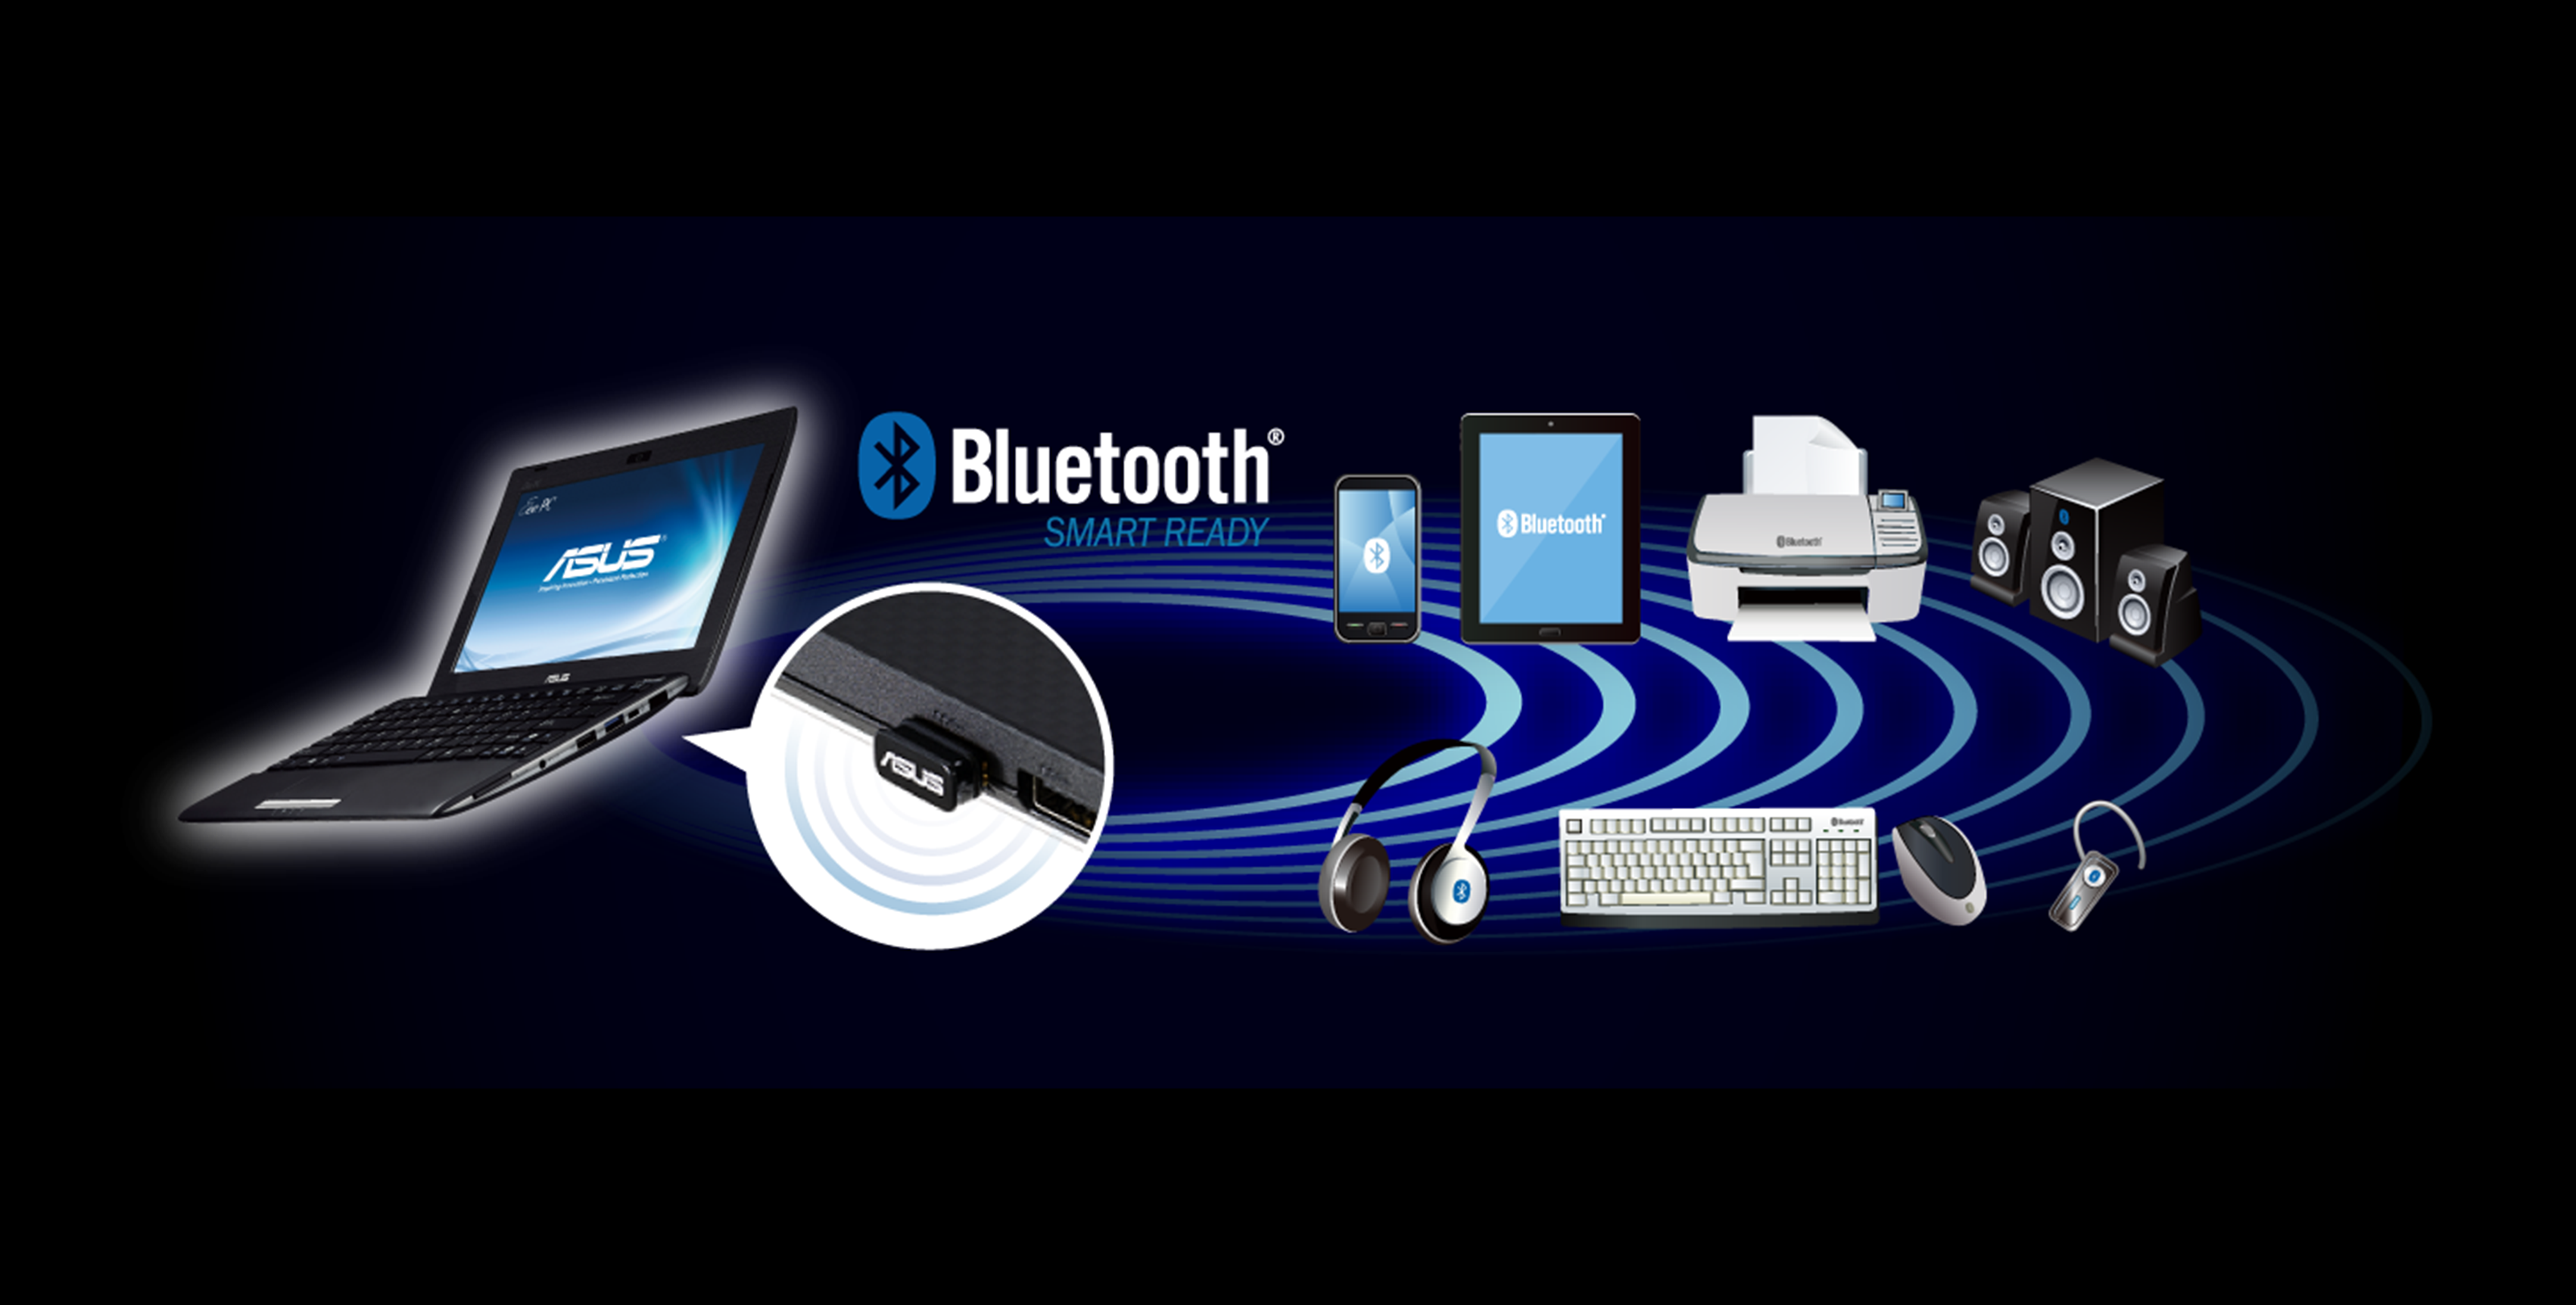 ASUS USB-BT500 features new Bluetooth 5 connectivity